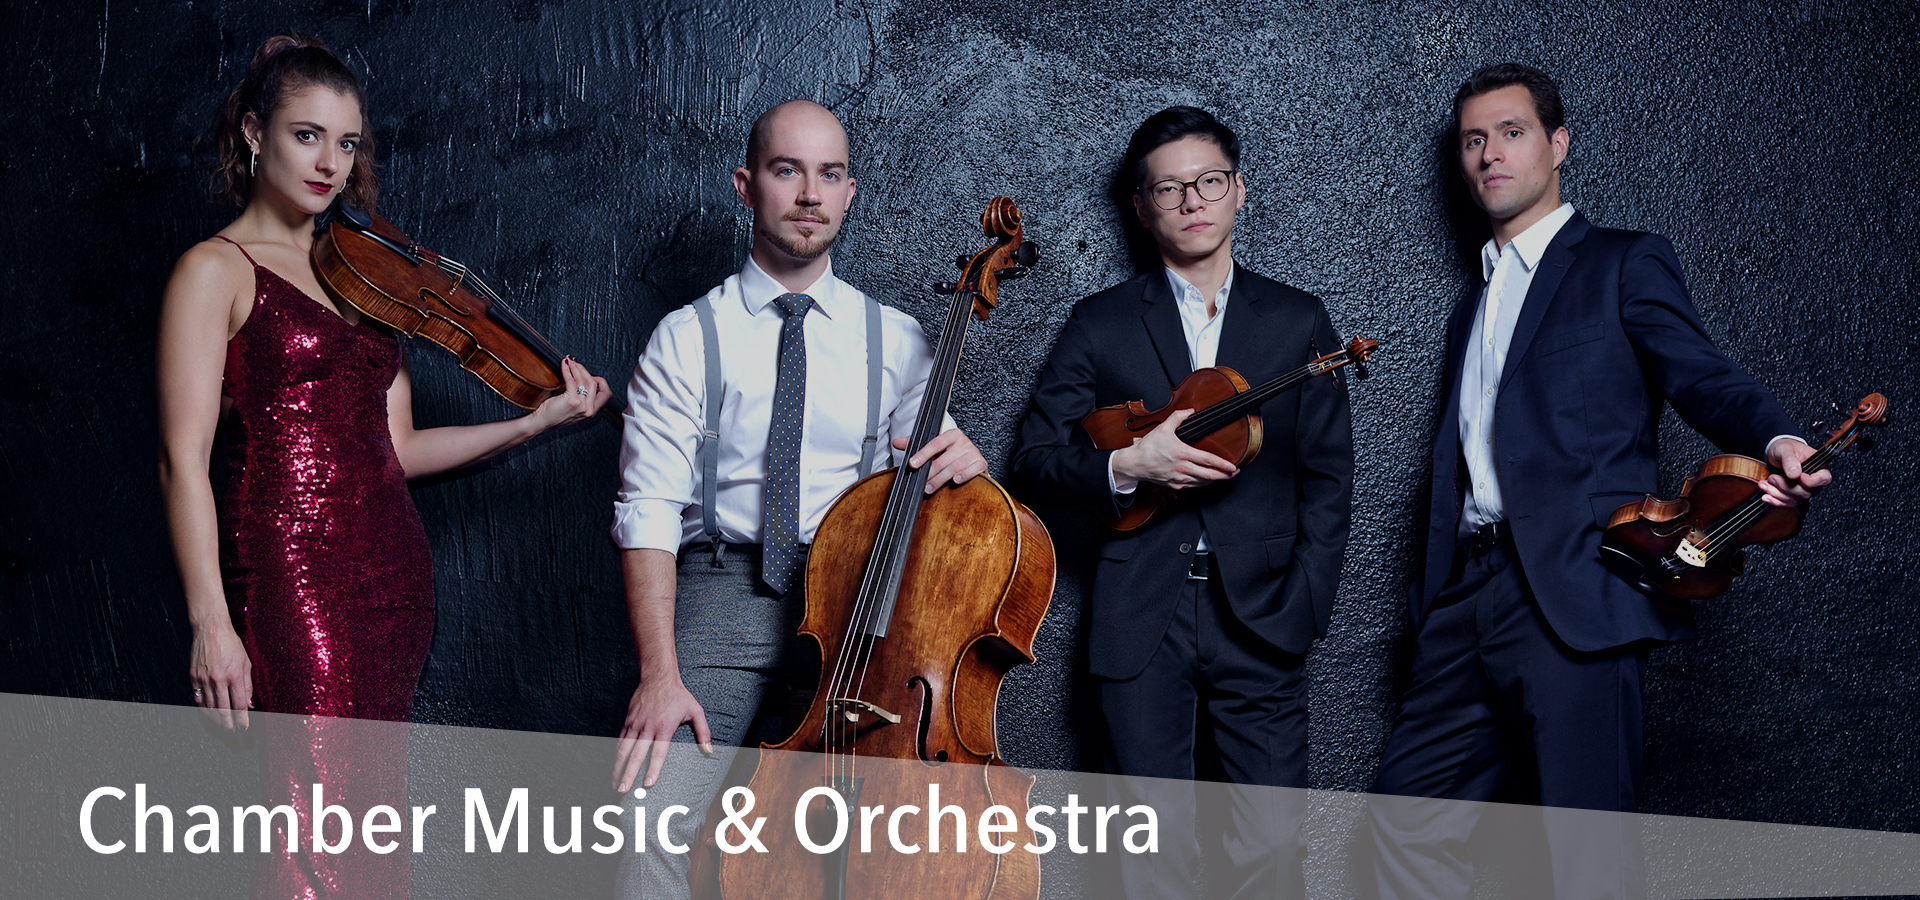 Dover Quartet on our 2022/23 Chamber Music and Orchestra Series